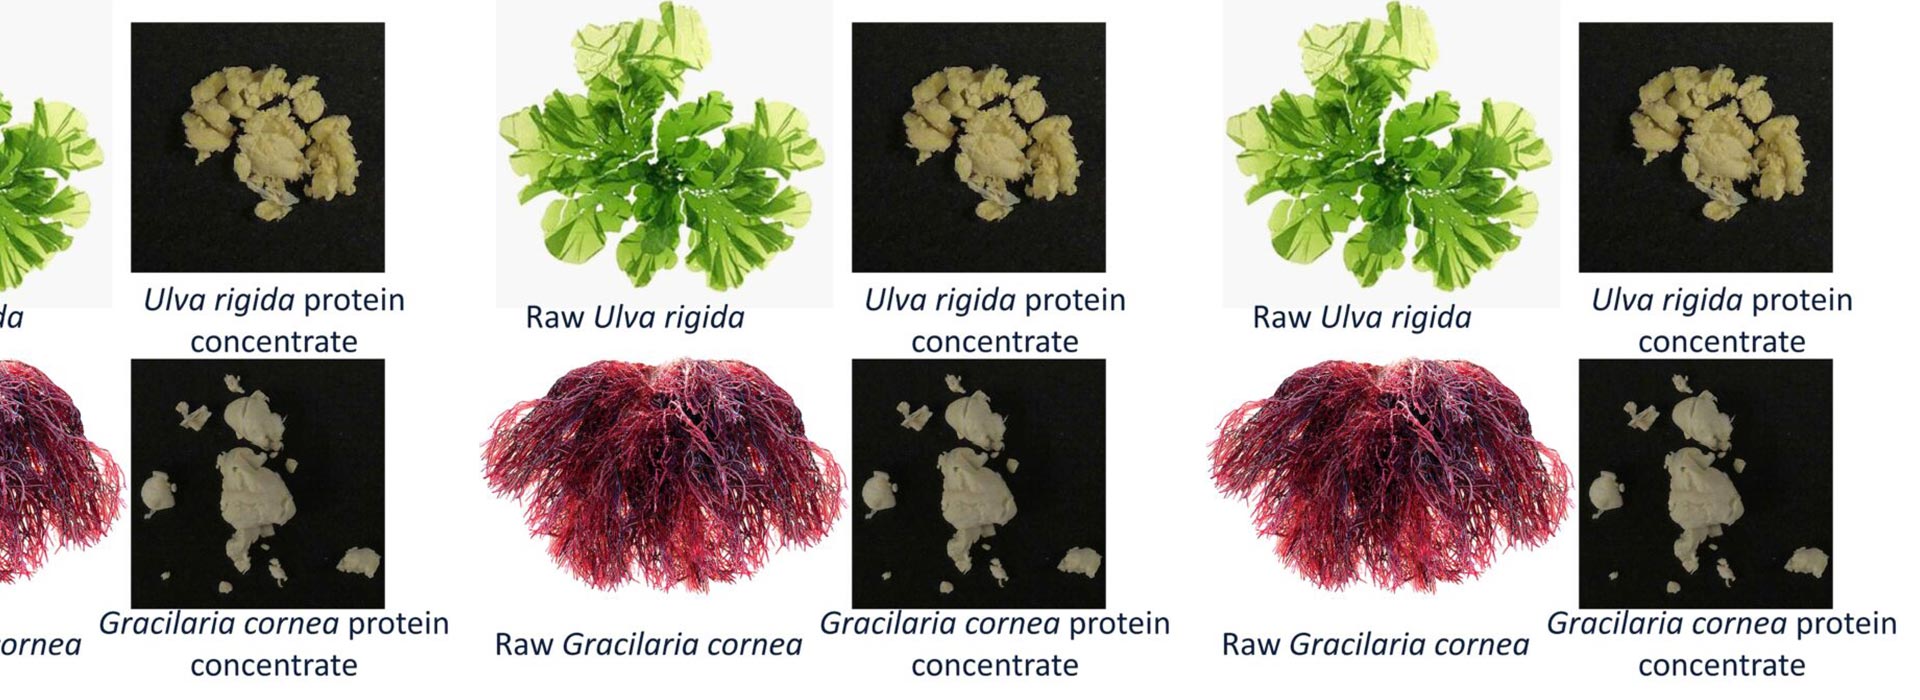 <p>Starch from the sea: the green macroalga ulva sp. as a potential source for sustainable starch production</p>
